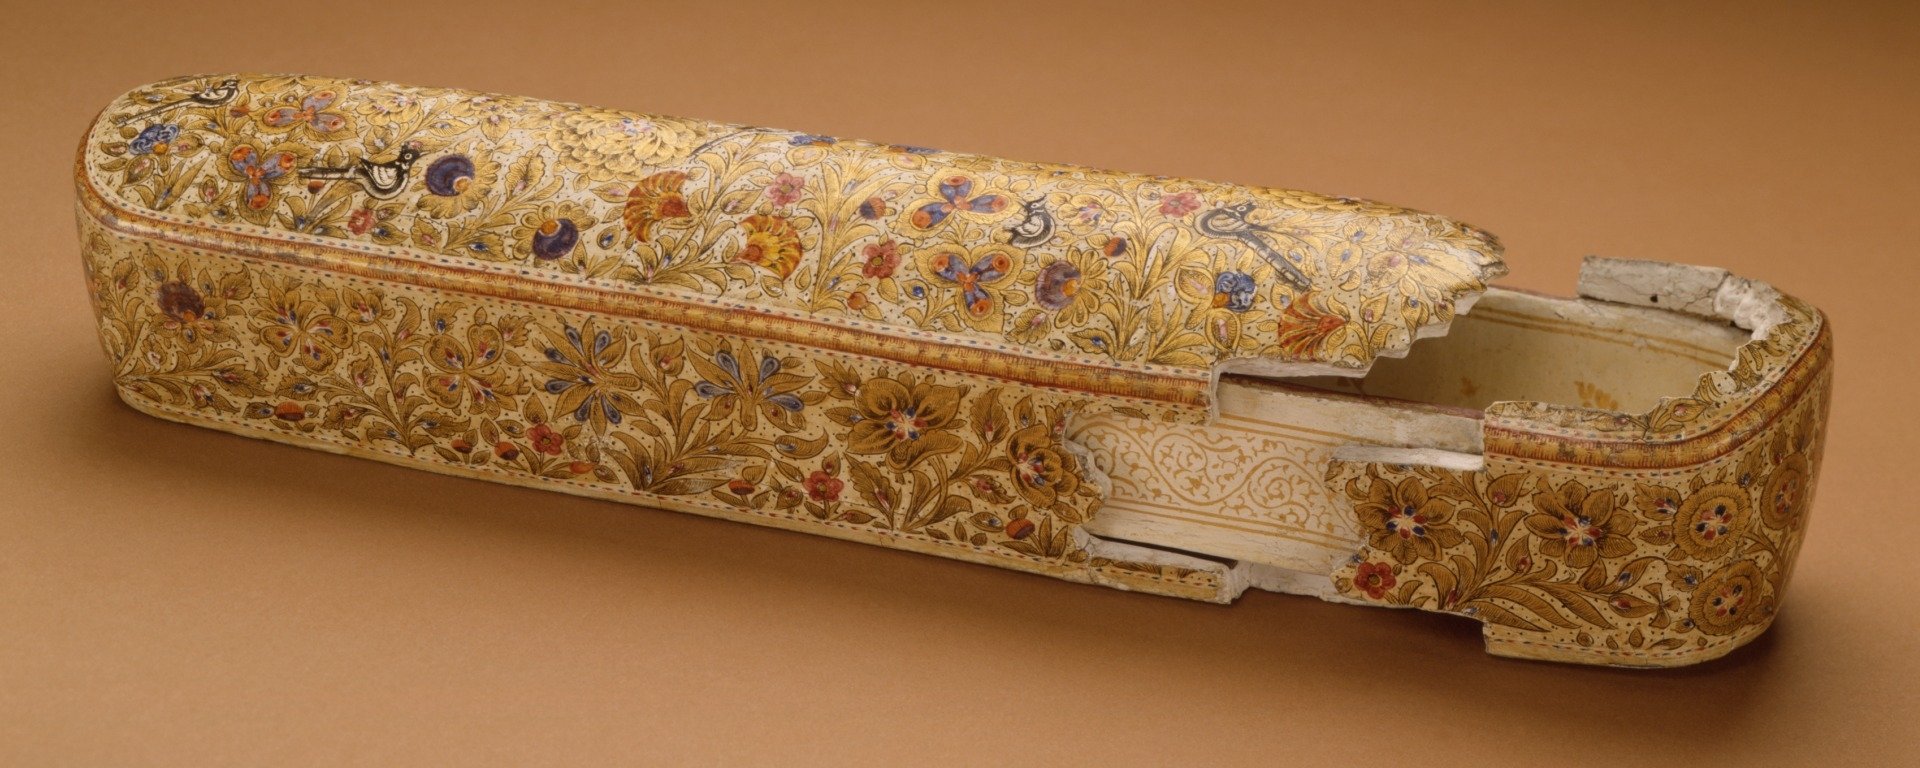 A 19th-century pen box made of papier-mache with paint and gold leaf. (Wikimedia)